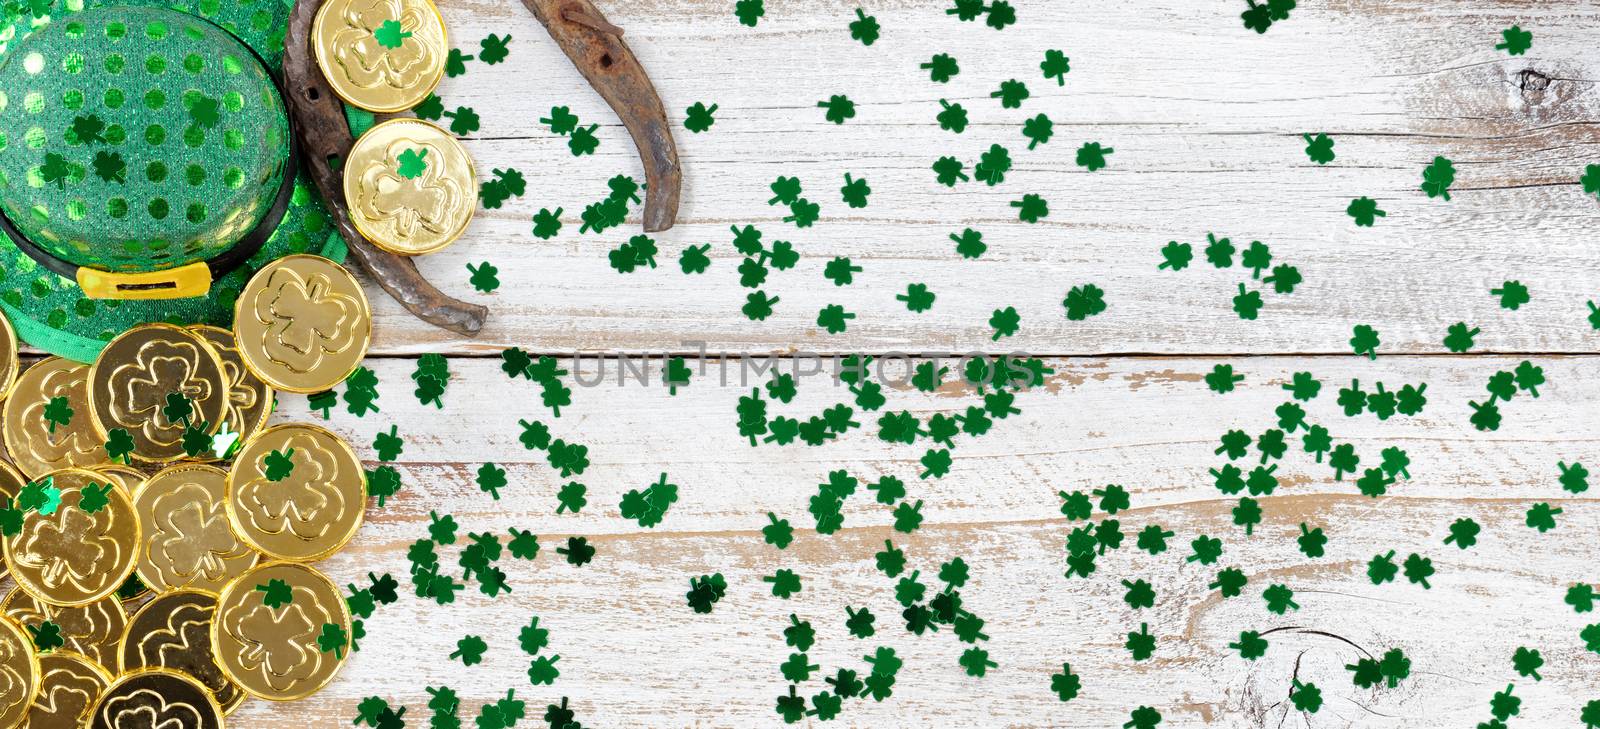 St Patrick day good luck hat, clovers and horseshoe with shiny gold coins forming left border on rustic white wooden boards 